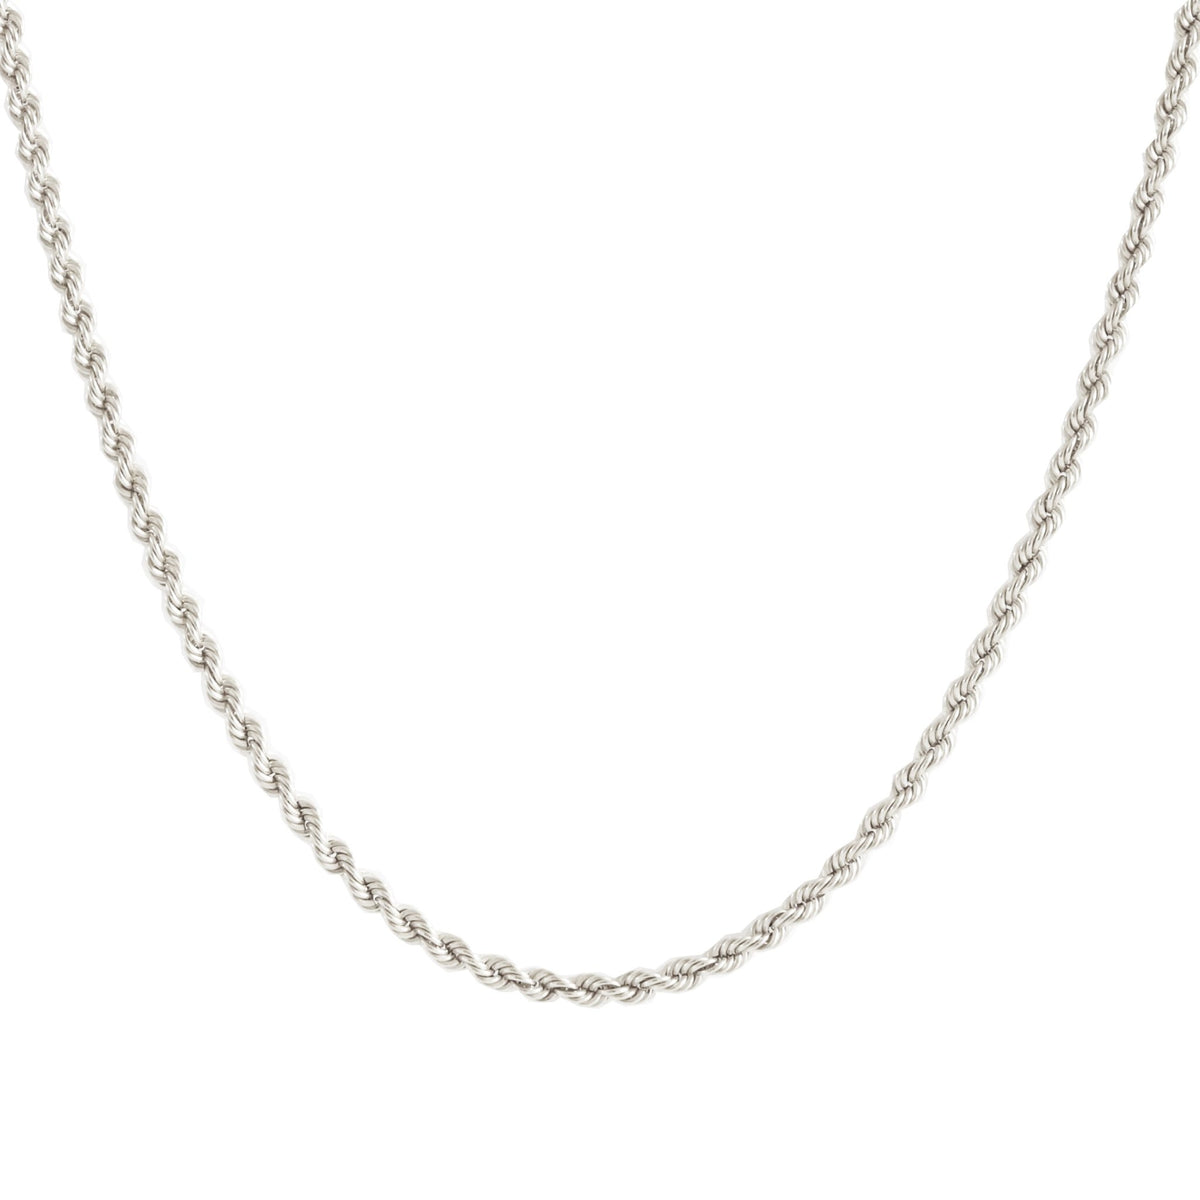 POISE TWISTED ROPE CHAIN 15-17&quot; NECKLACE SILVER - SO PRETTY CARA COTTER